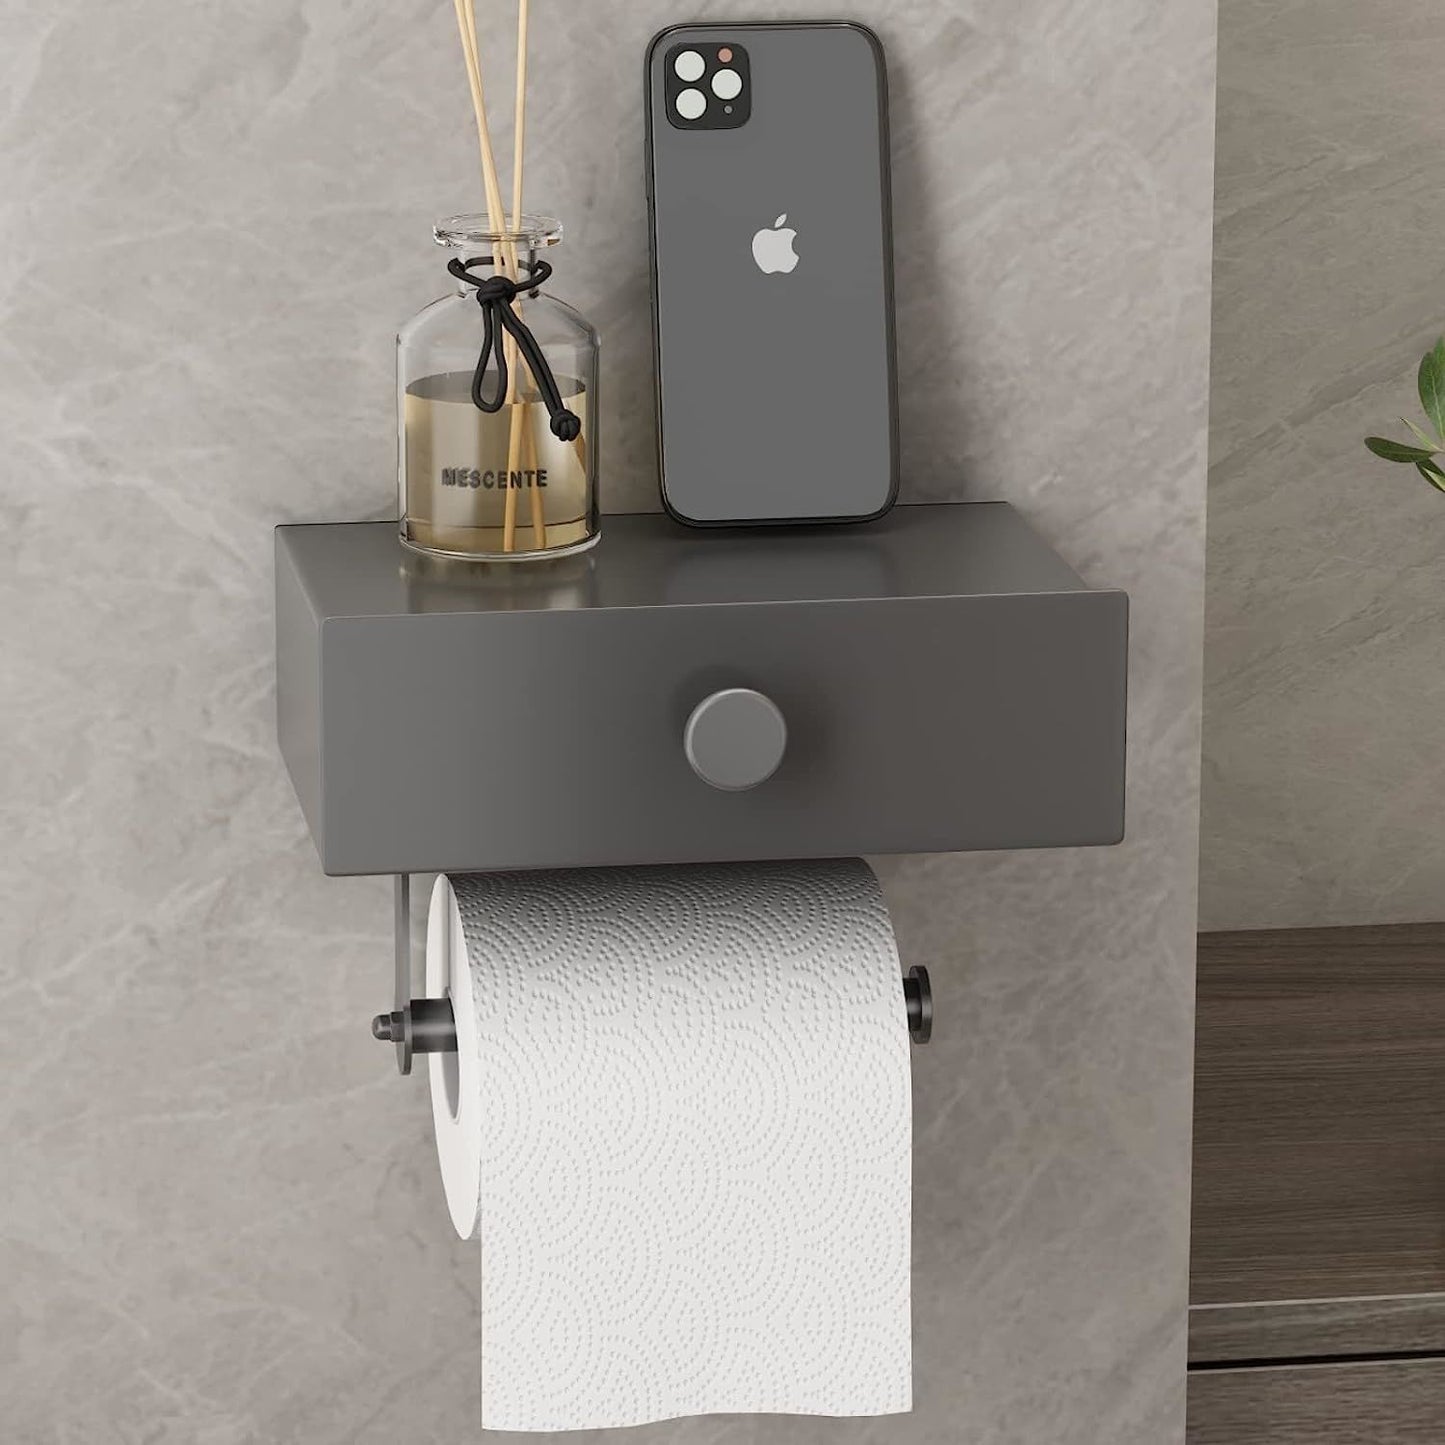 Toilet Paper Holder with Shelf Black Wipes Dispenser for Bathroom Stainless Steel Toilet Paper Holder with Storage Drawer Adhesive Wall Mount Small Bathroom